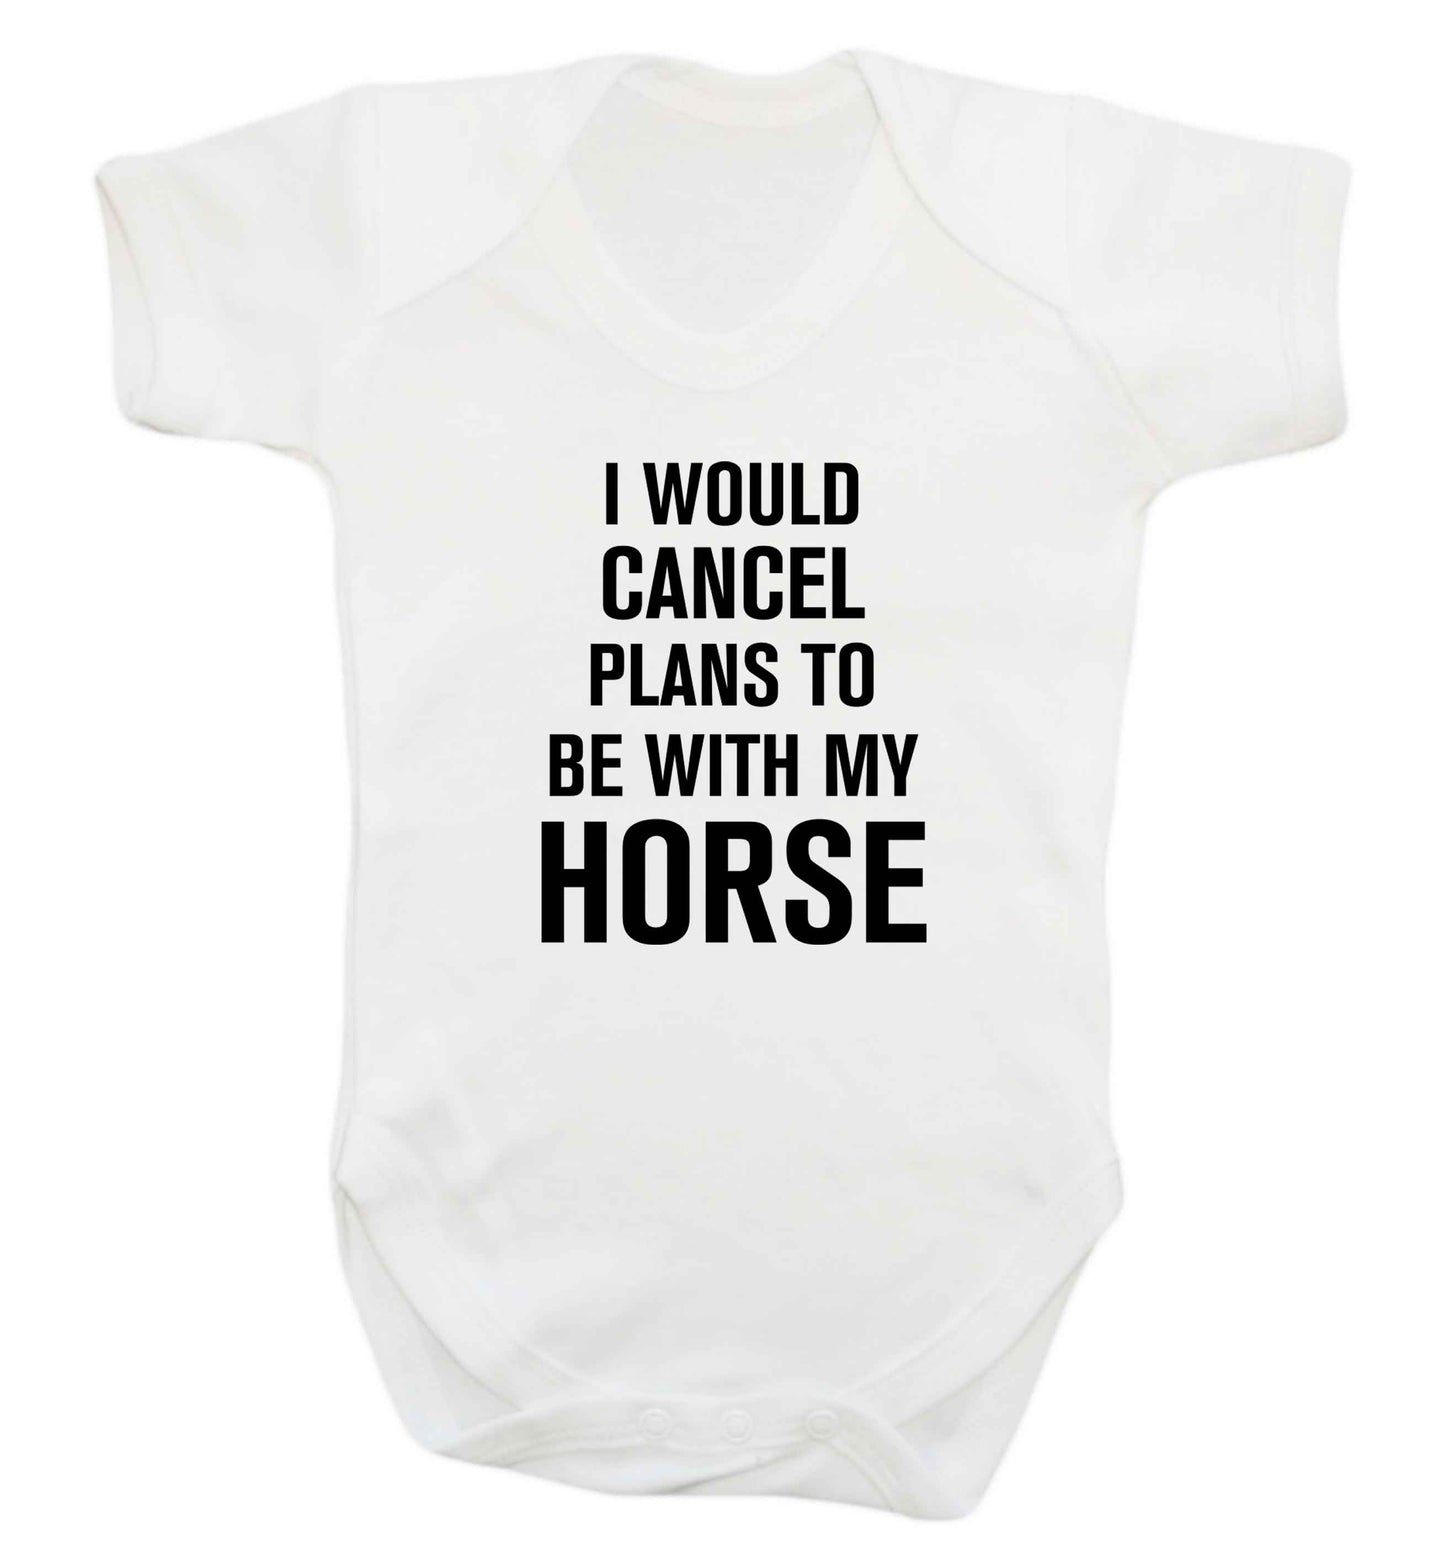 I will cancel plans to be with my horse baby vest white 18-24 months